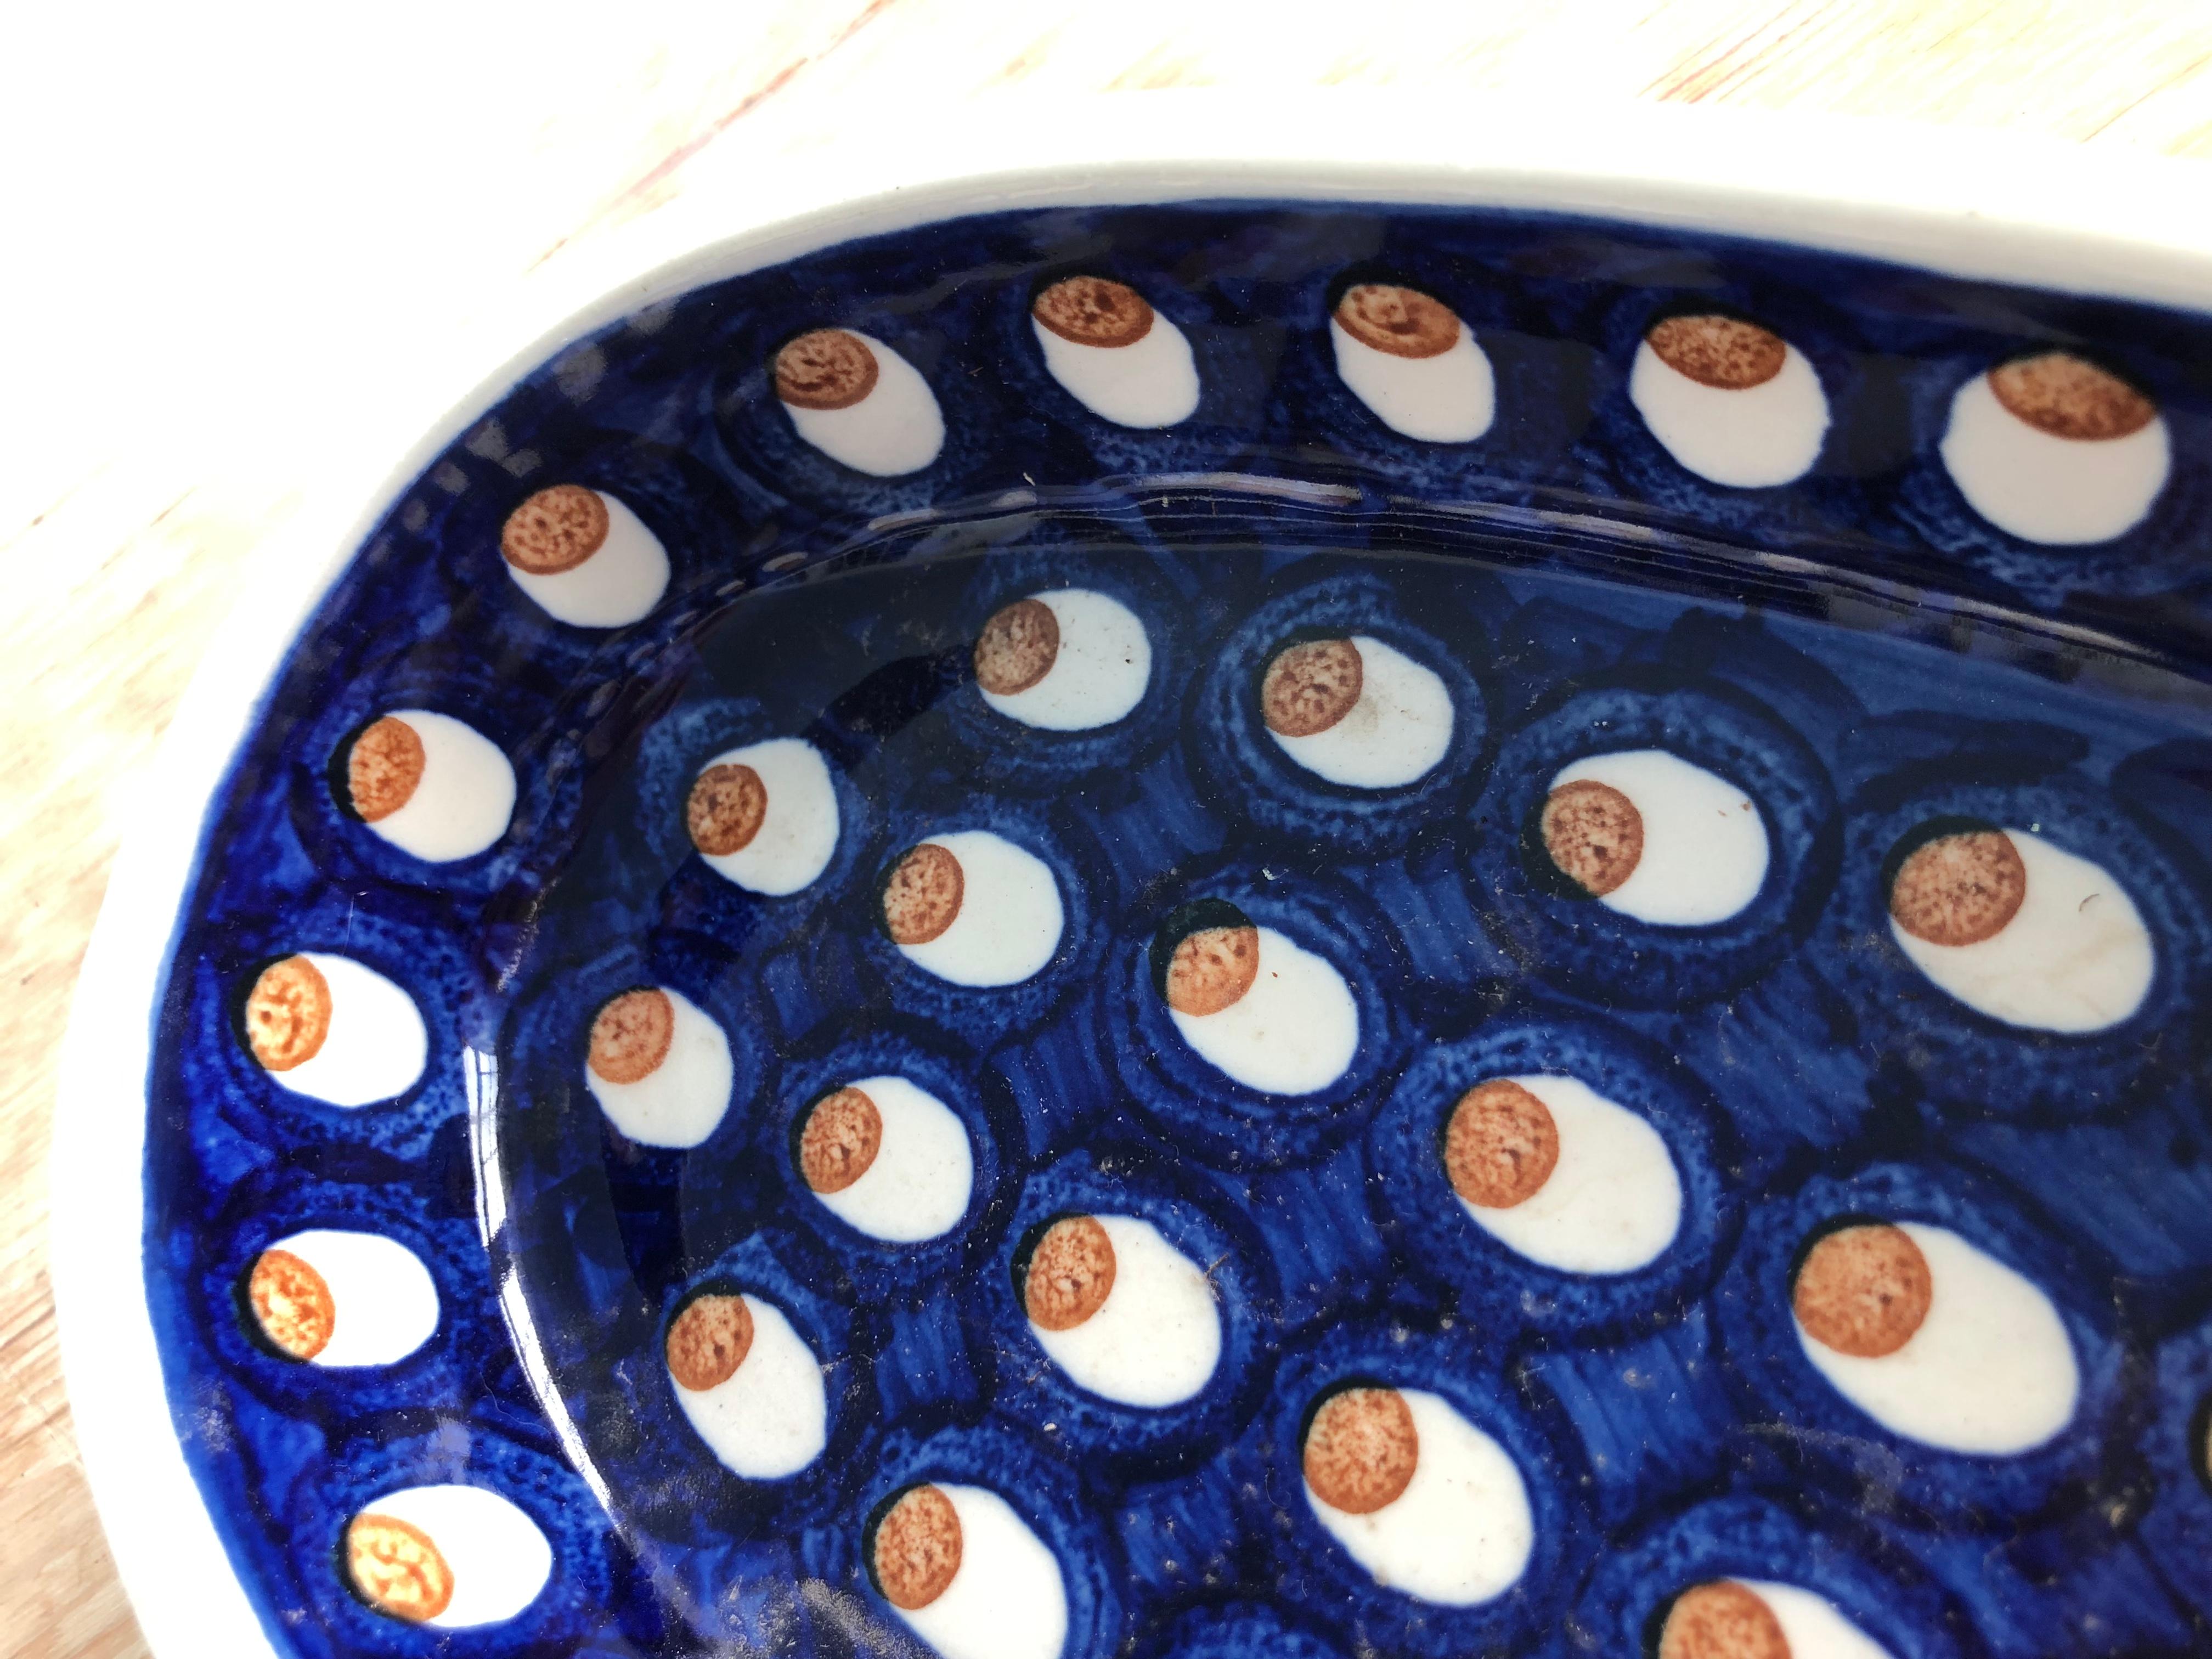 Hand painted Mid-Century Modern serving dish. Lovey blue background with red and white accents. Handmade in Poland. Retains original label. Stamped on underside.